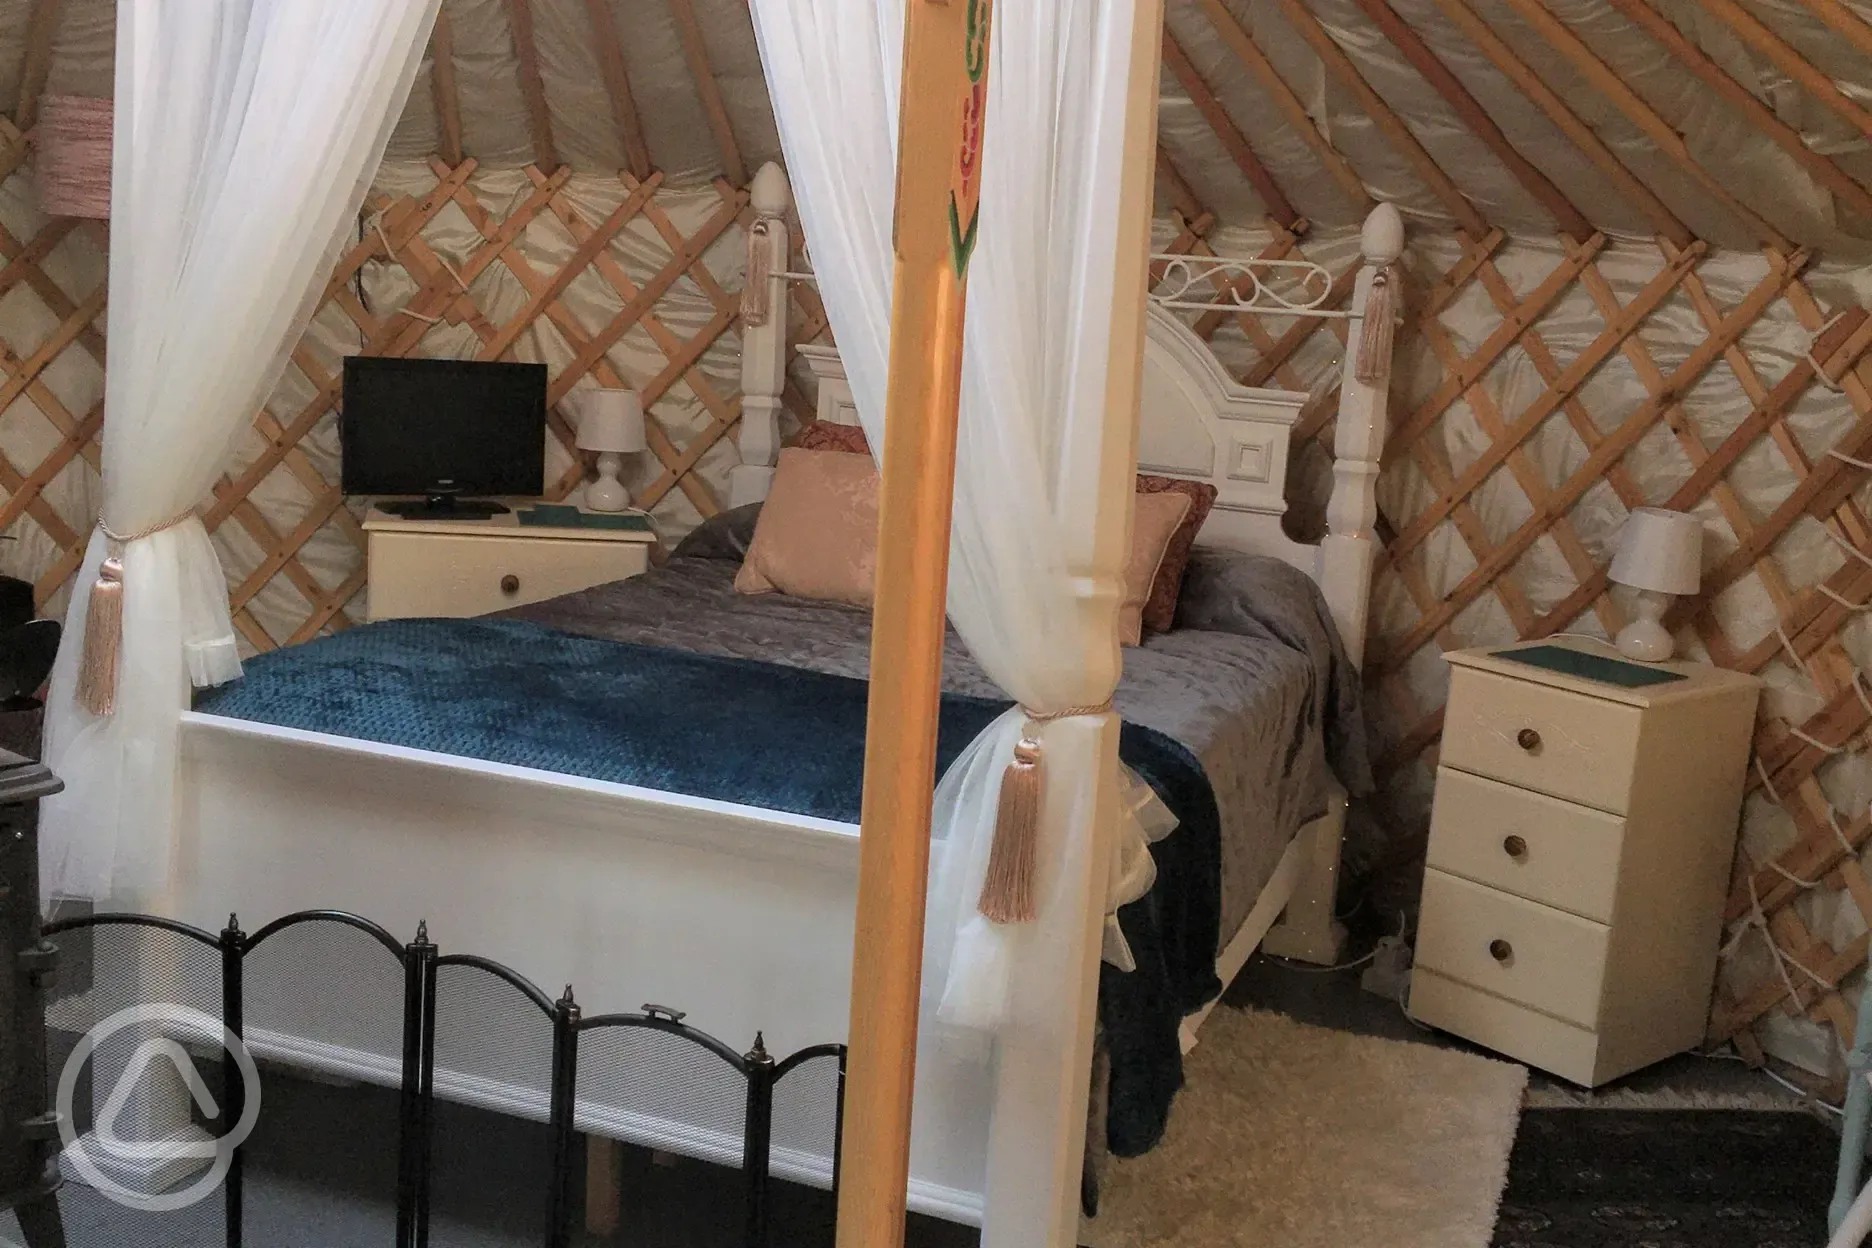 Willow Yurt four poster bed